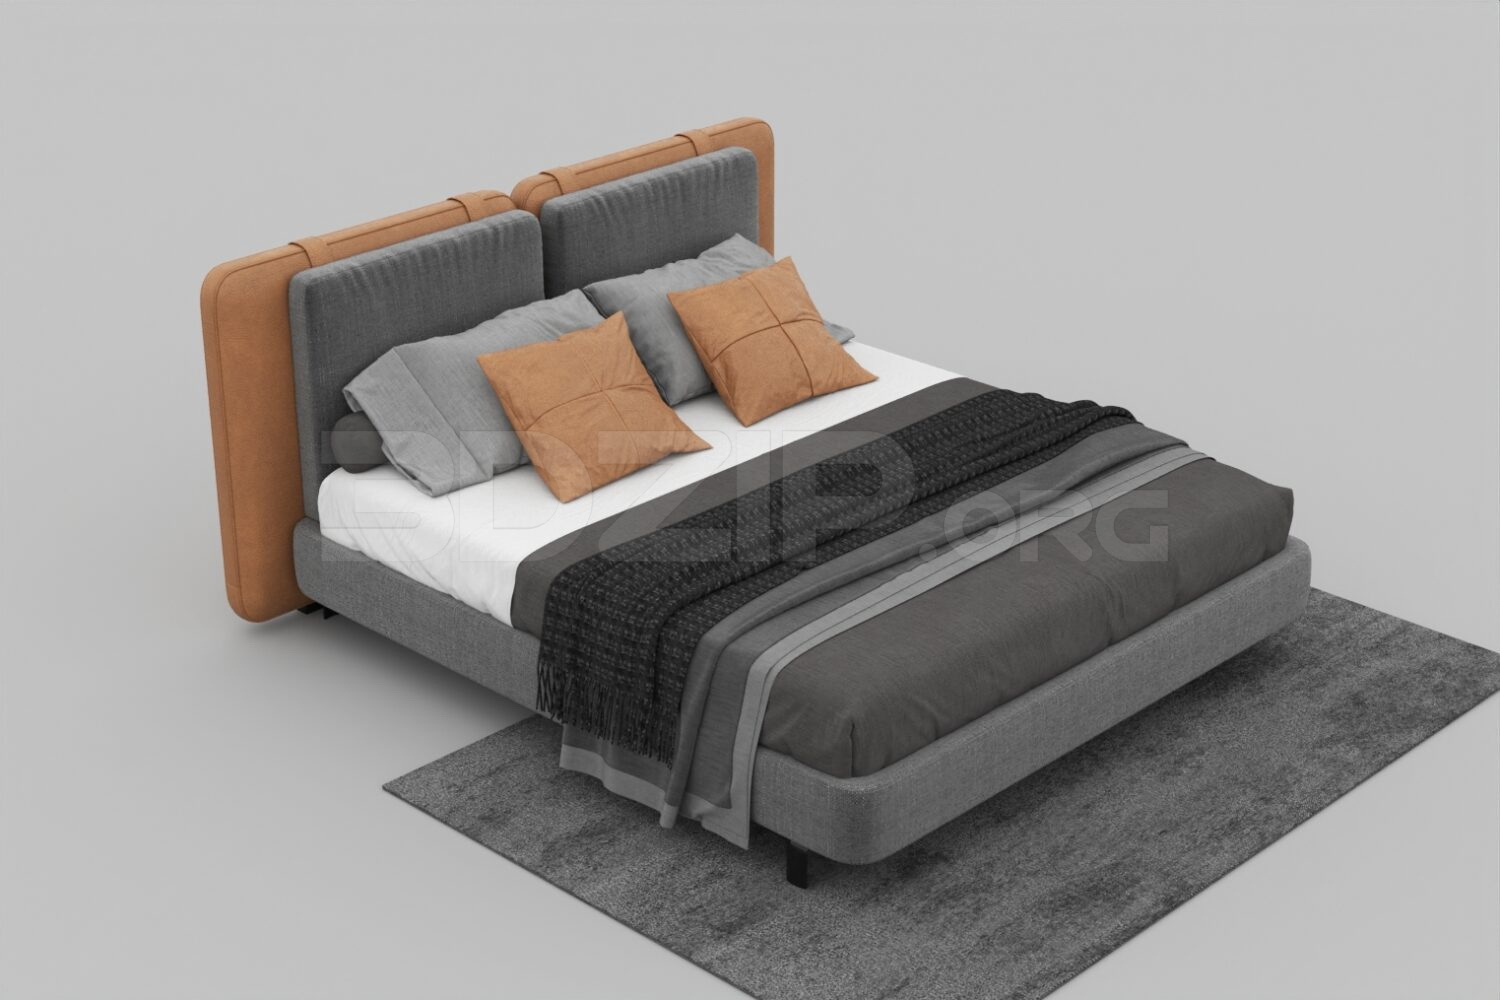 535. Download Free Bed Model By Phong Mai